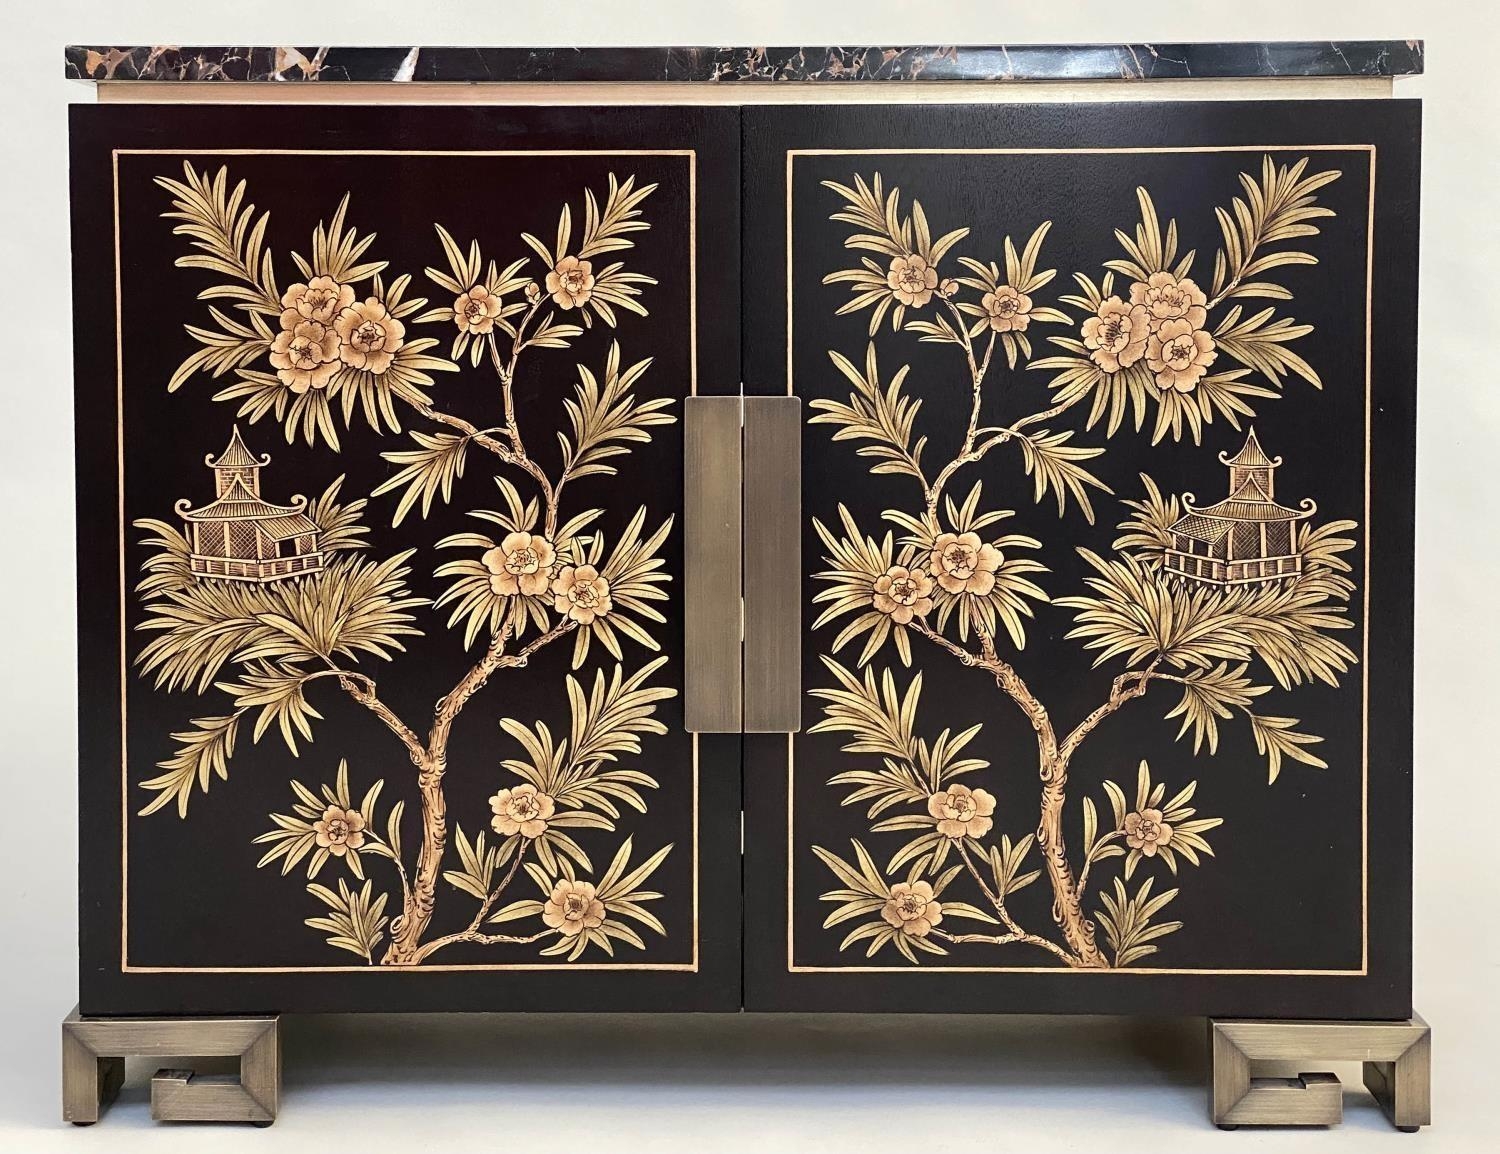 CABINET, lacquered two door with gilt Chinoiserie painted decoration enclosing shelves by 'Restall